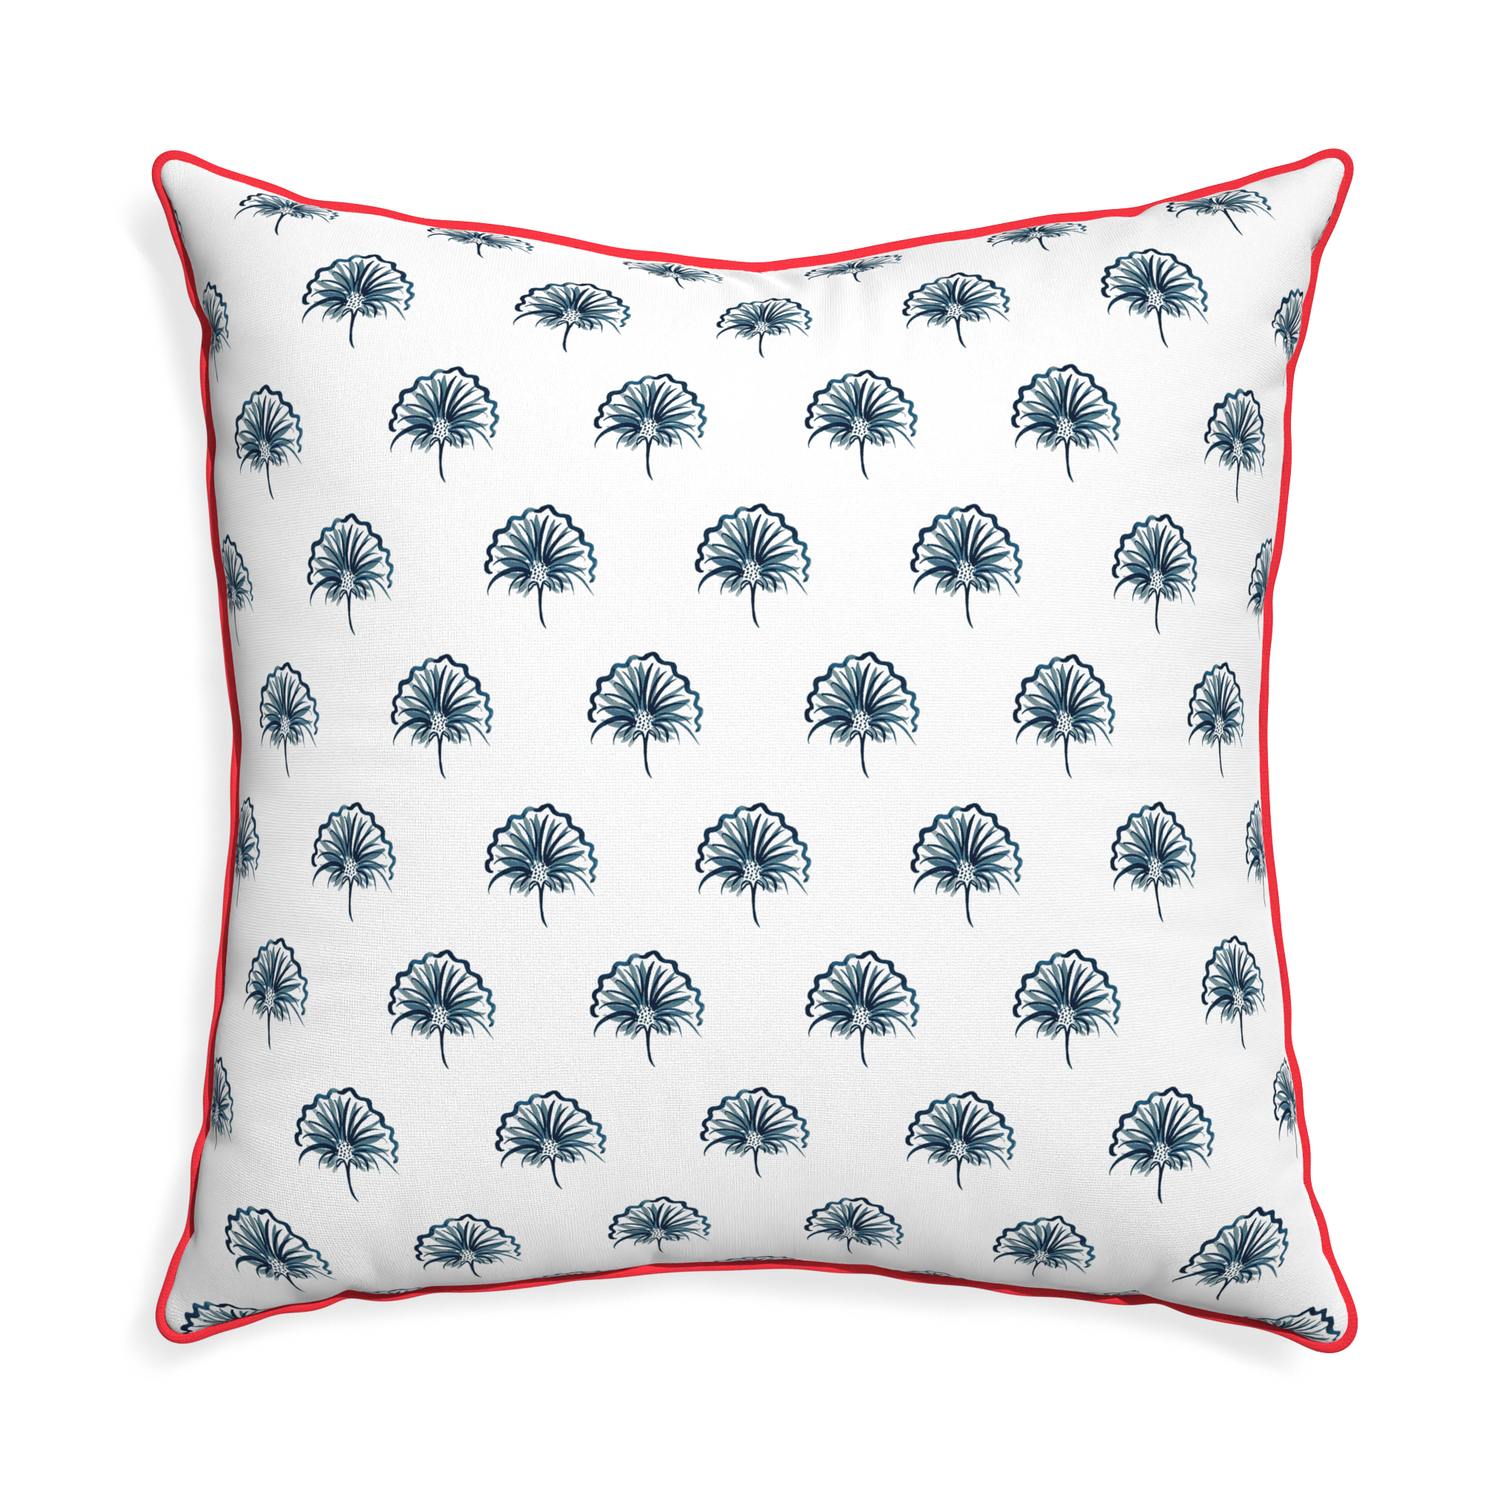 Euro-sham penelope midnight custom floral navypillow with cherry piping on white background